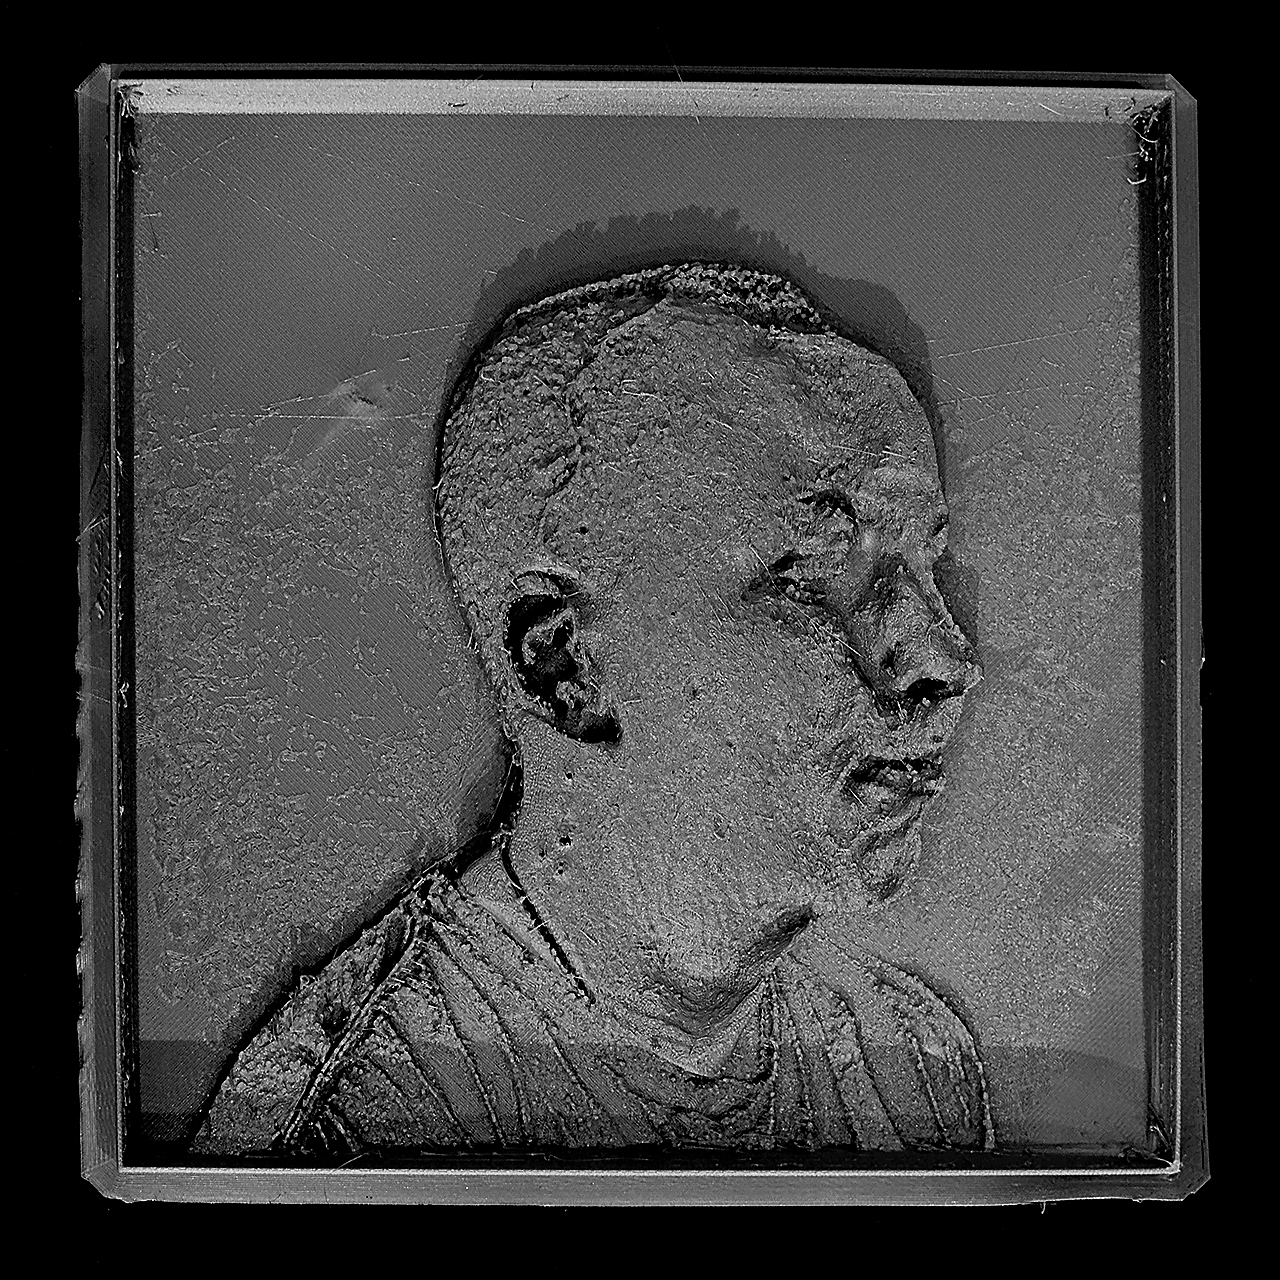 #01 - Portraits for the Visually Impaired, 3D Printed Relief